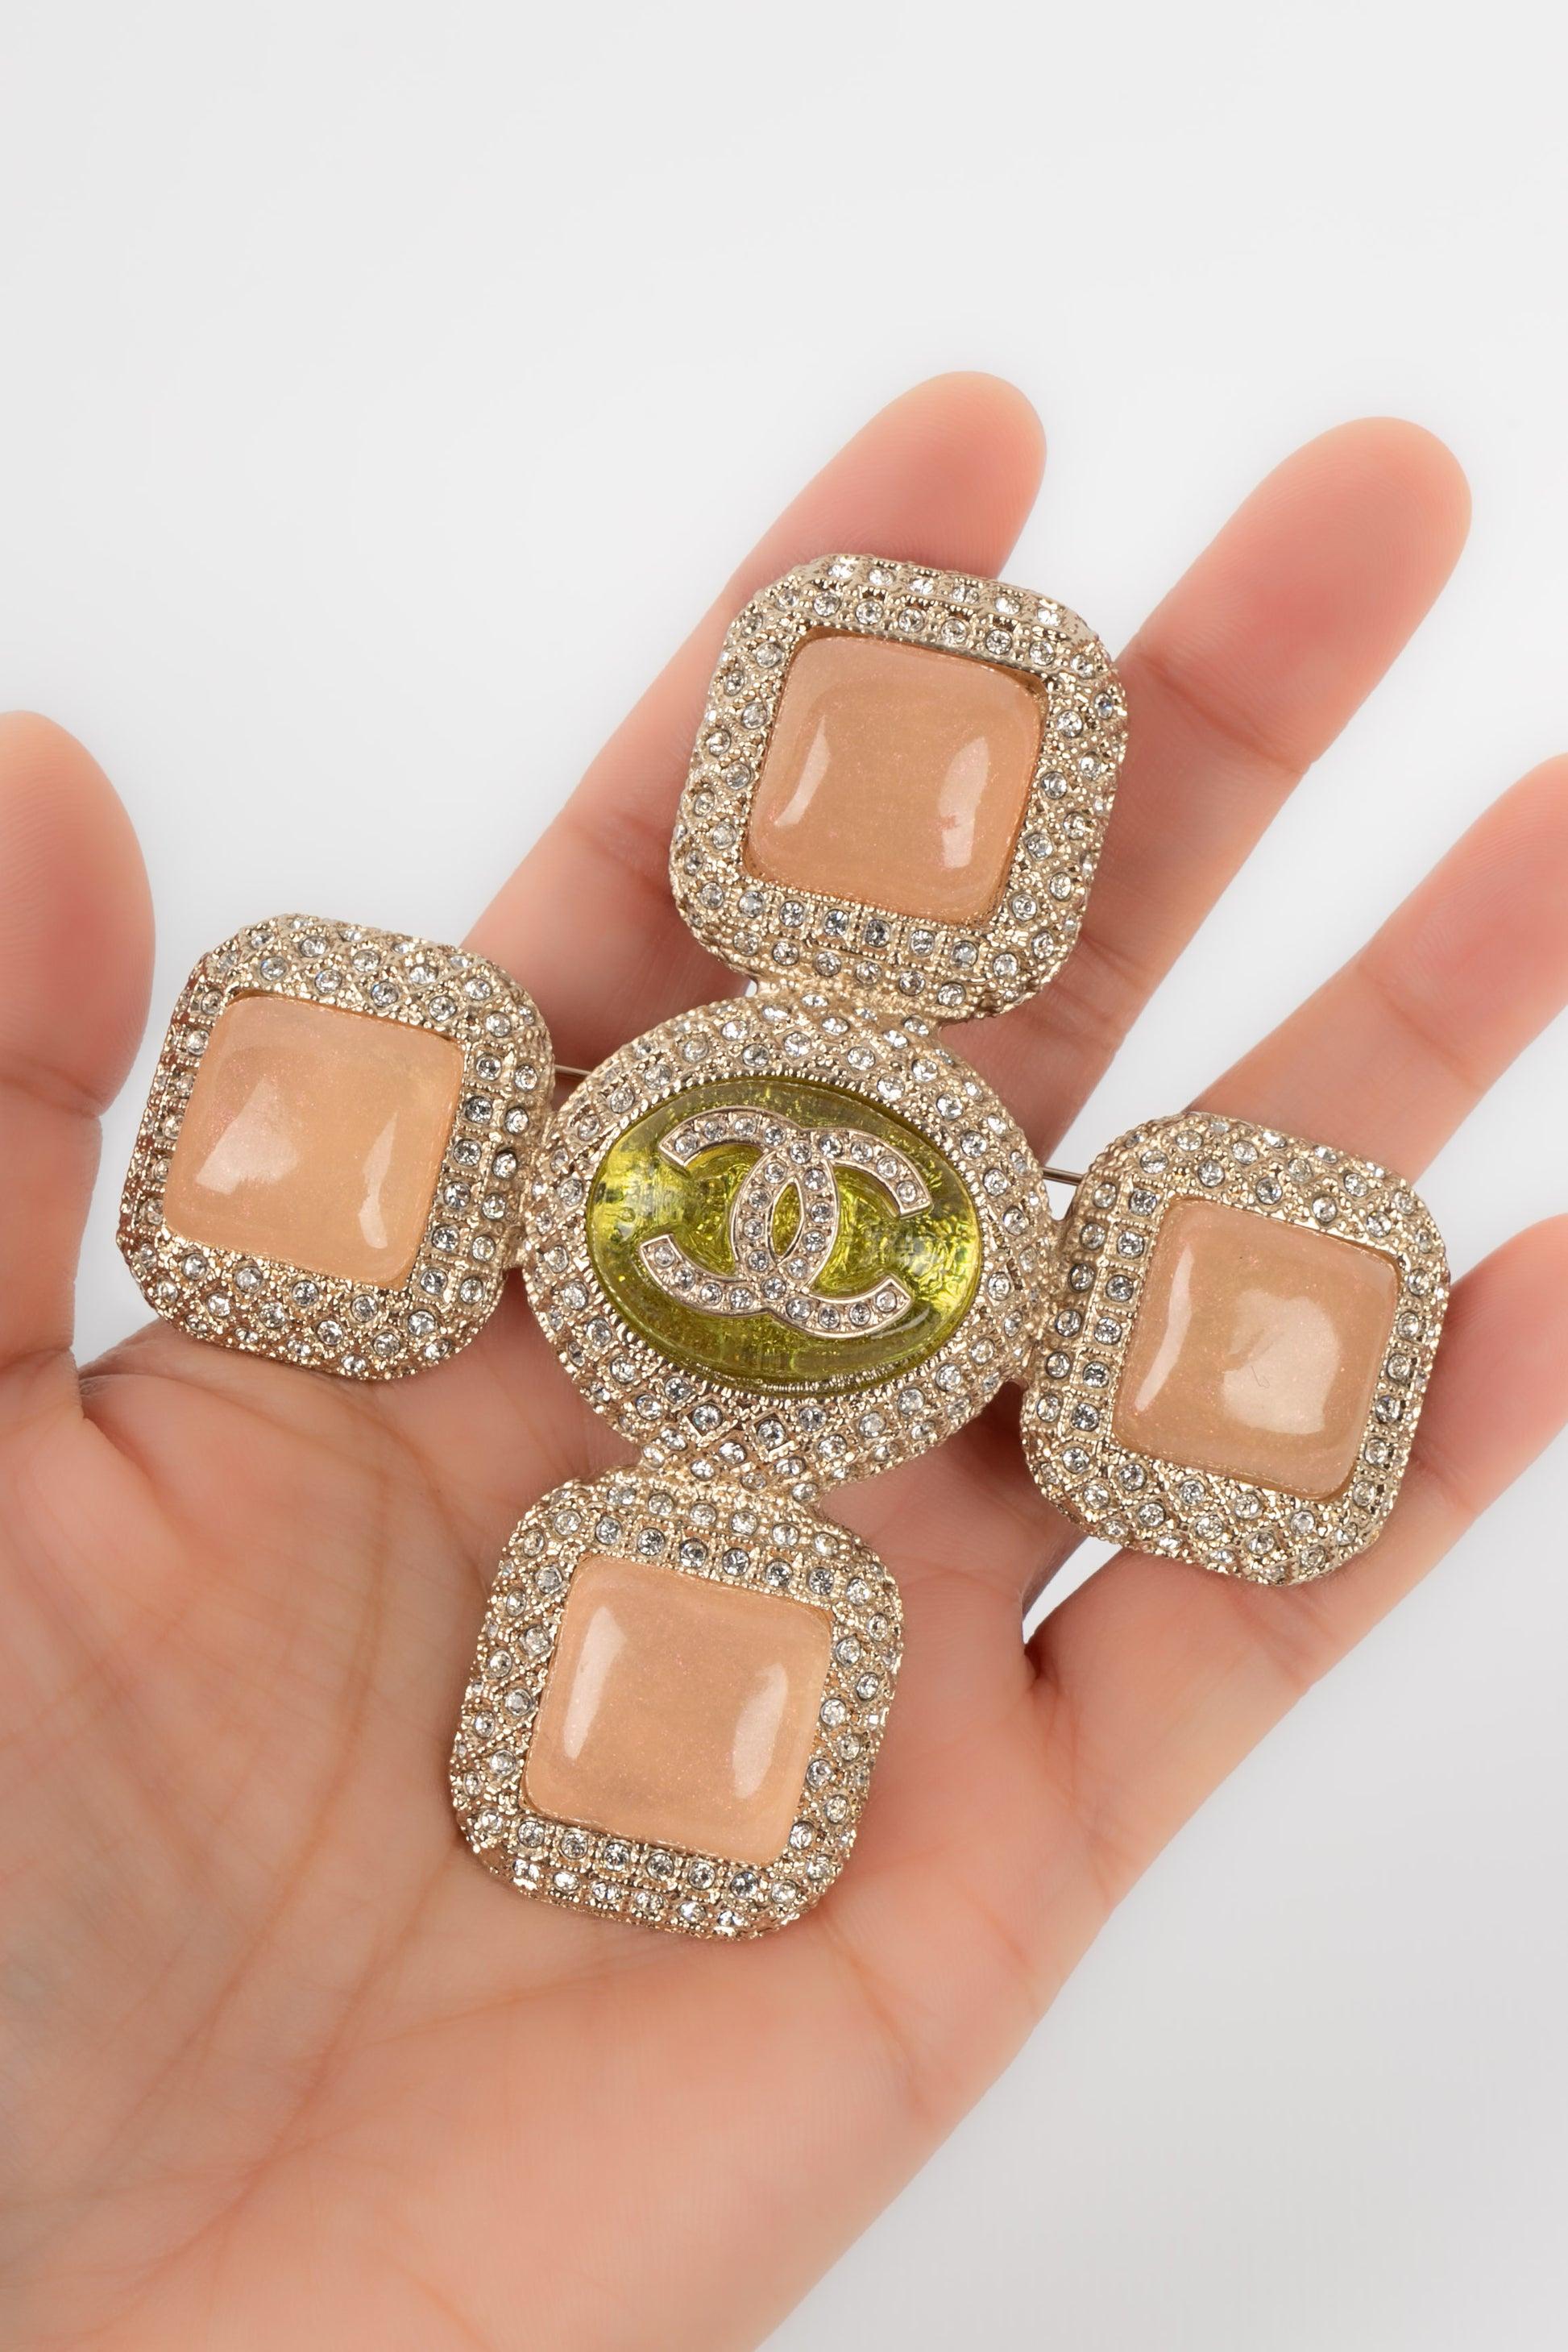 Chanel Champagne Metal Brooch Ornamented with Rhinestones and Resin, 2020 3